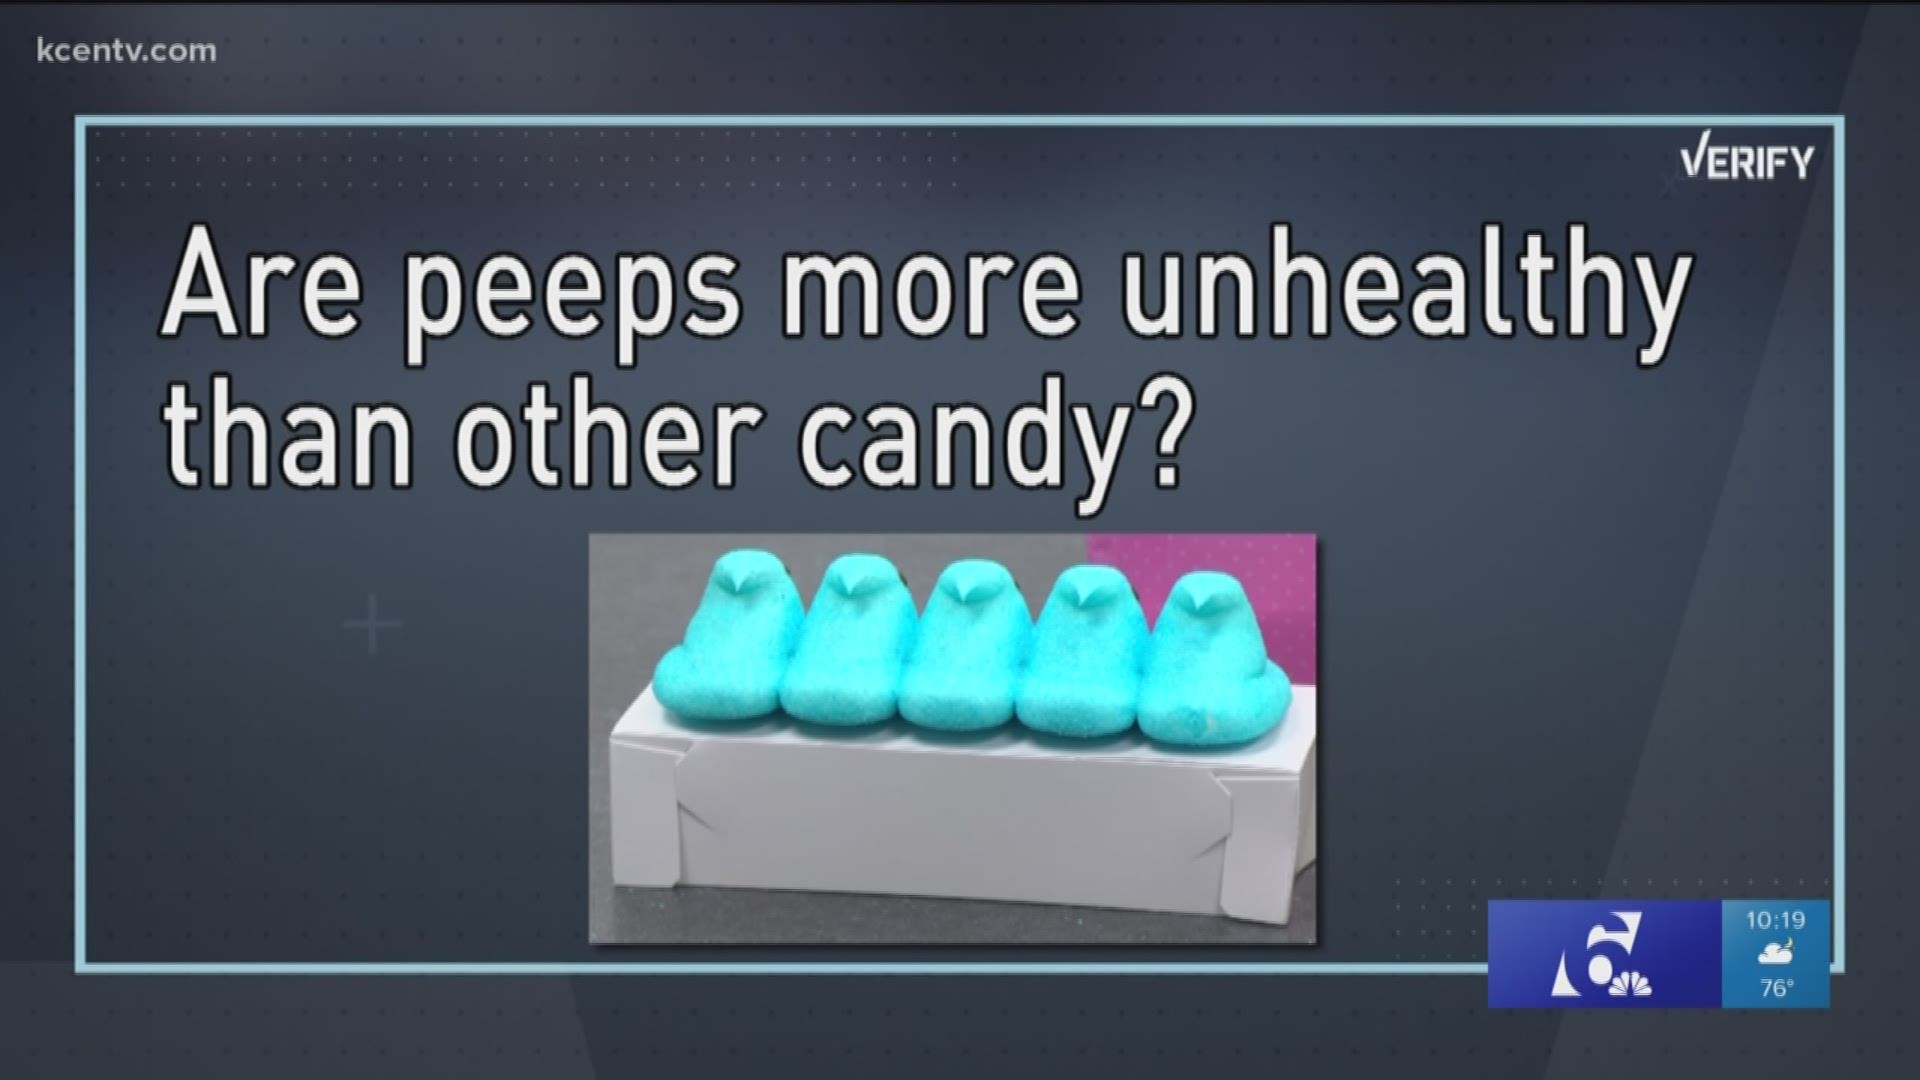 Verify Are peeps the most unhealthy candy?